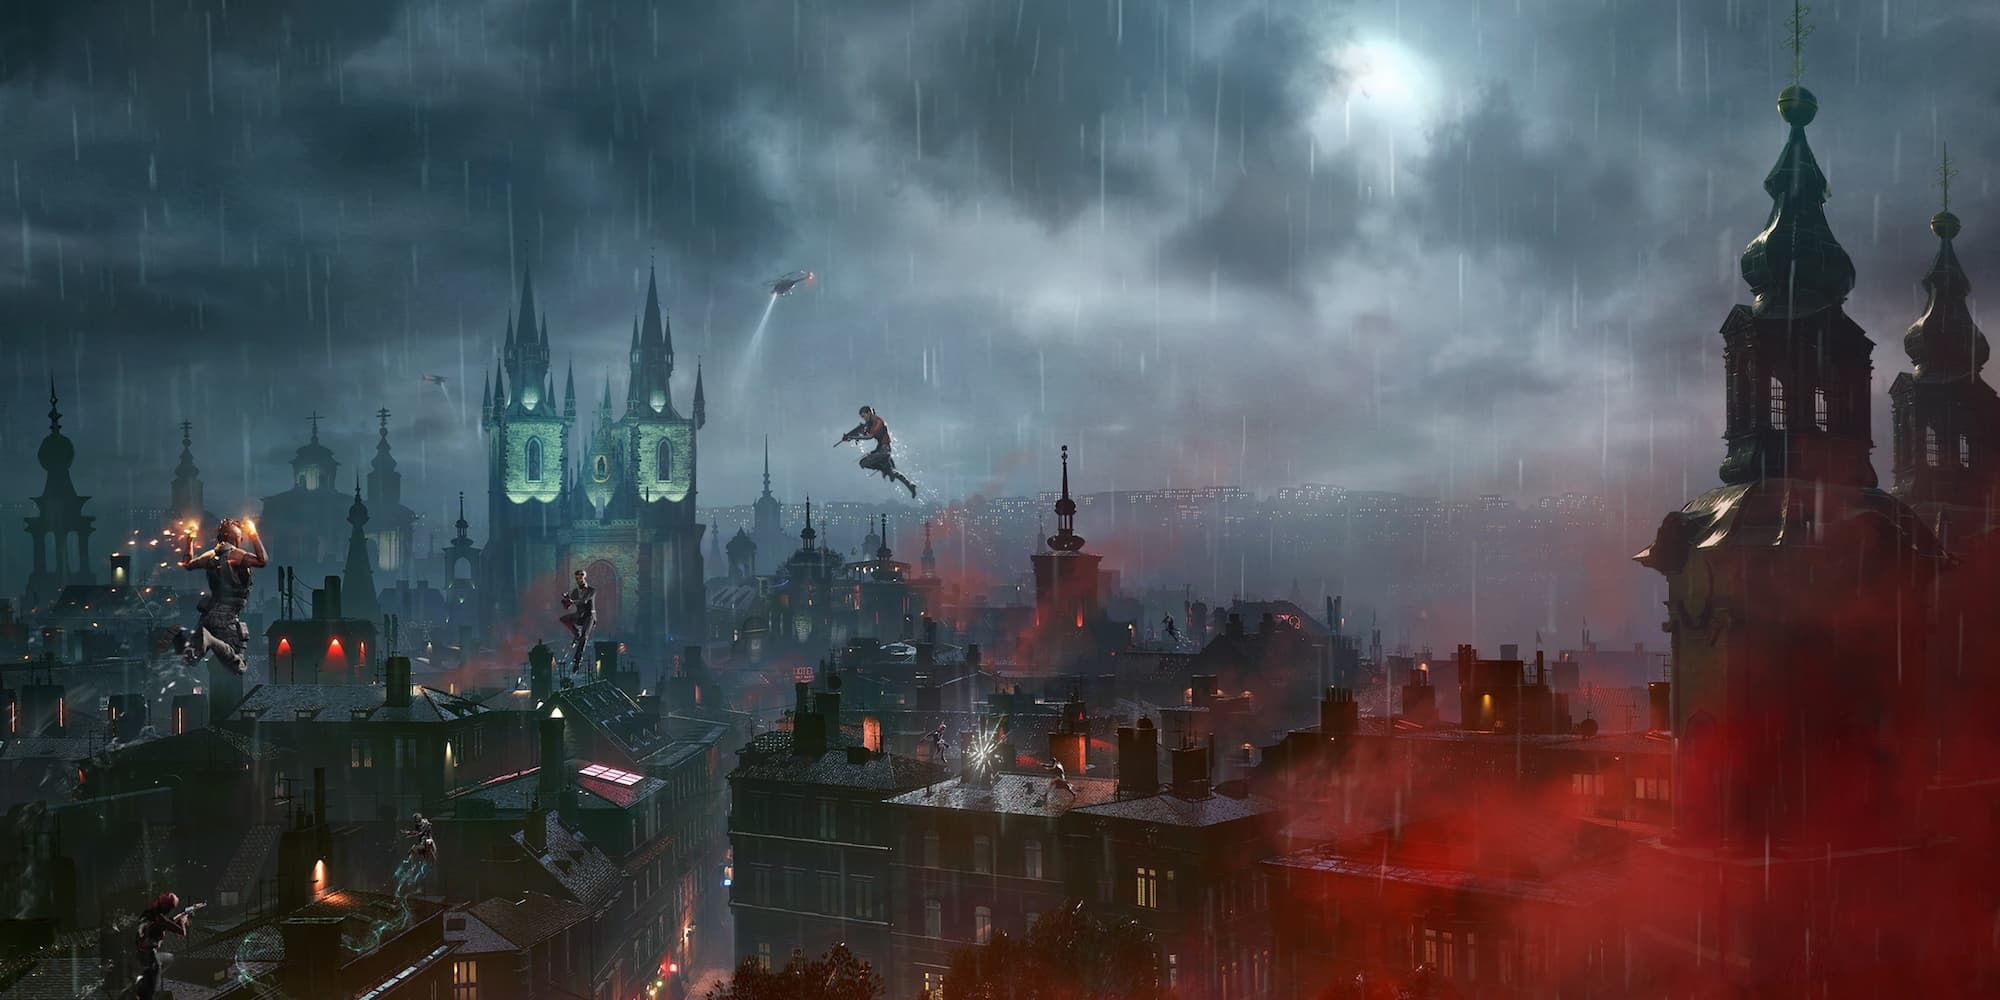 Three vampires fight on the rooftops as the Red Gas approaches from the right